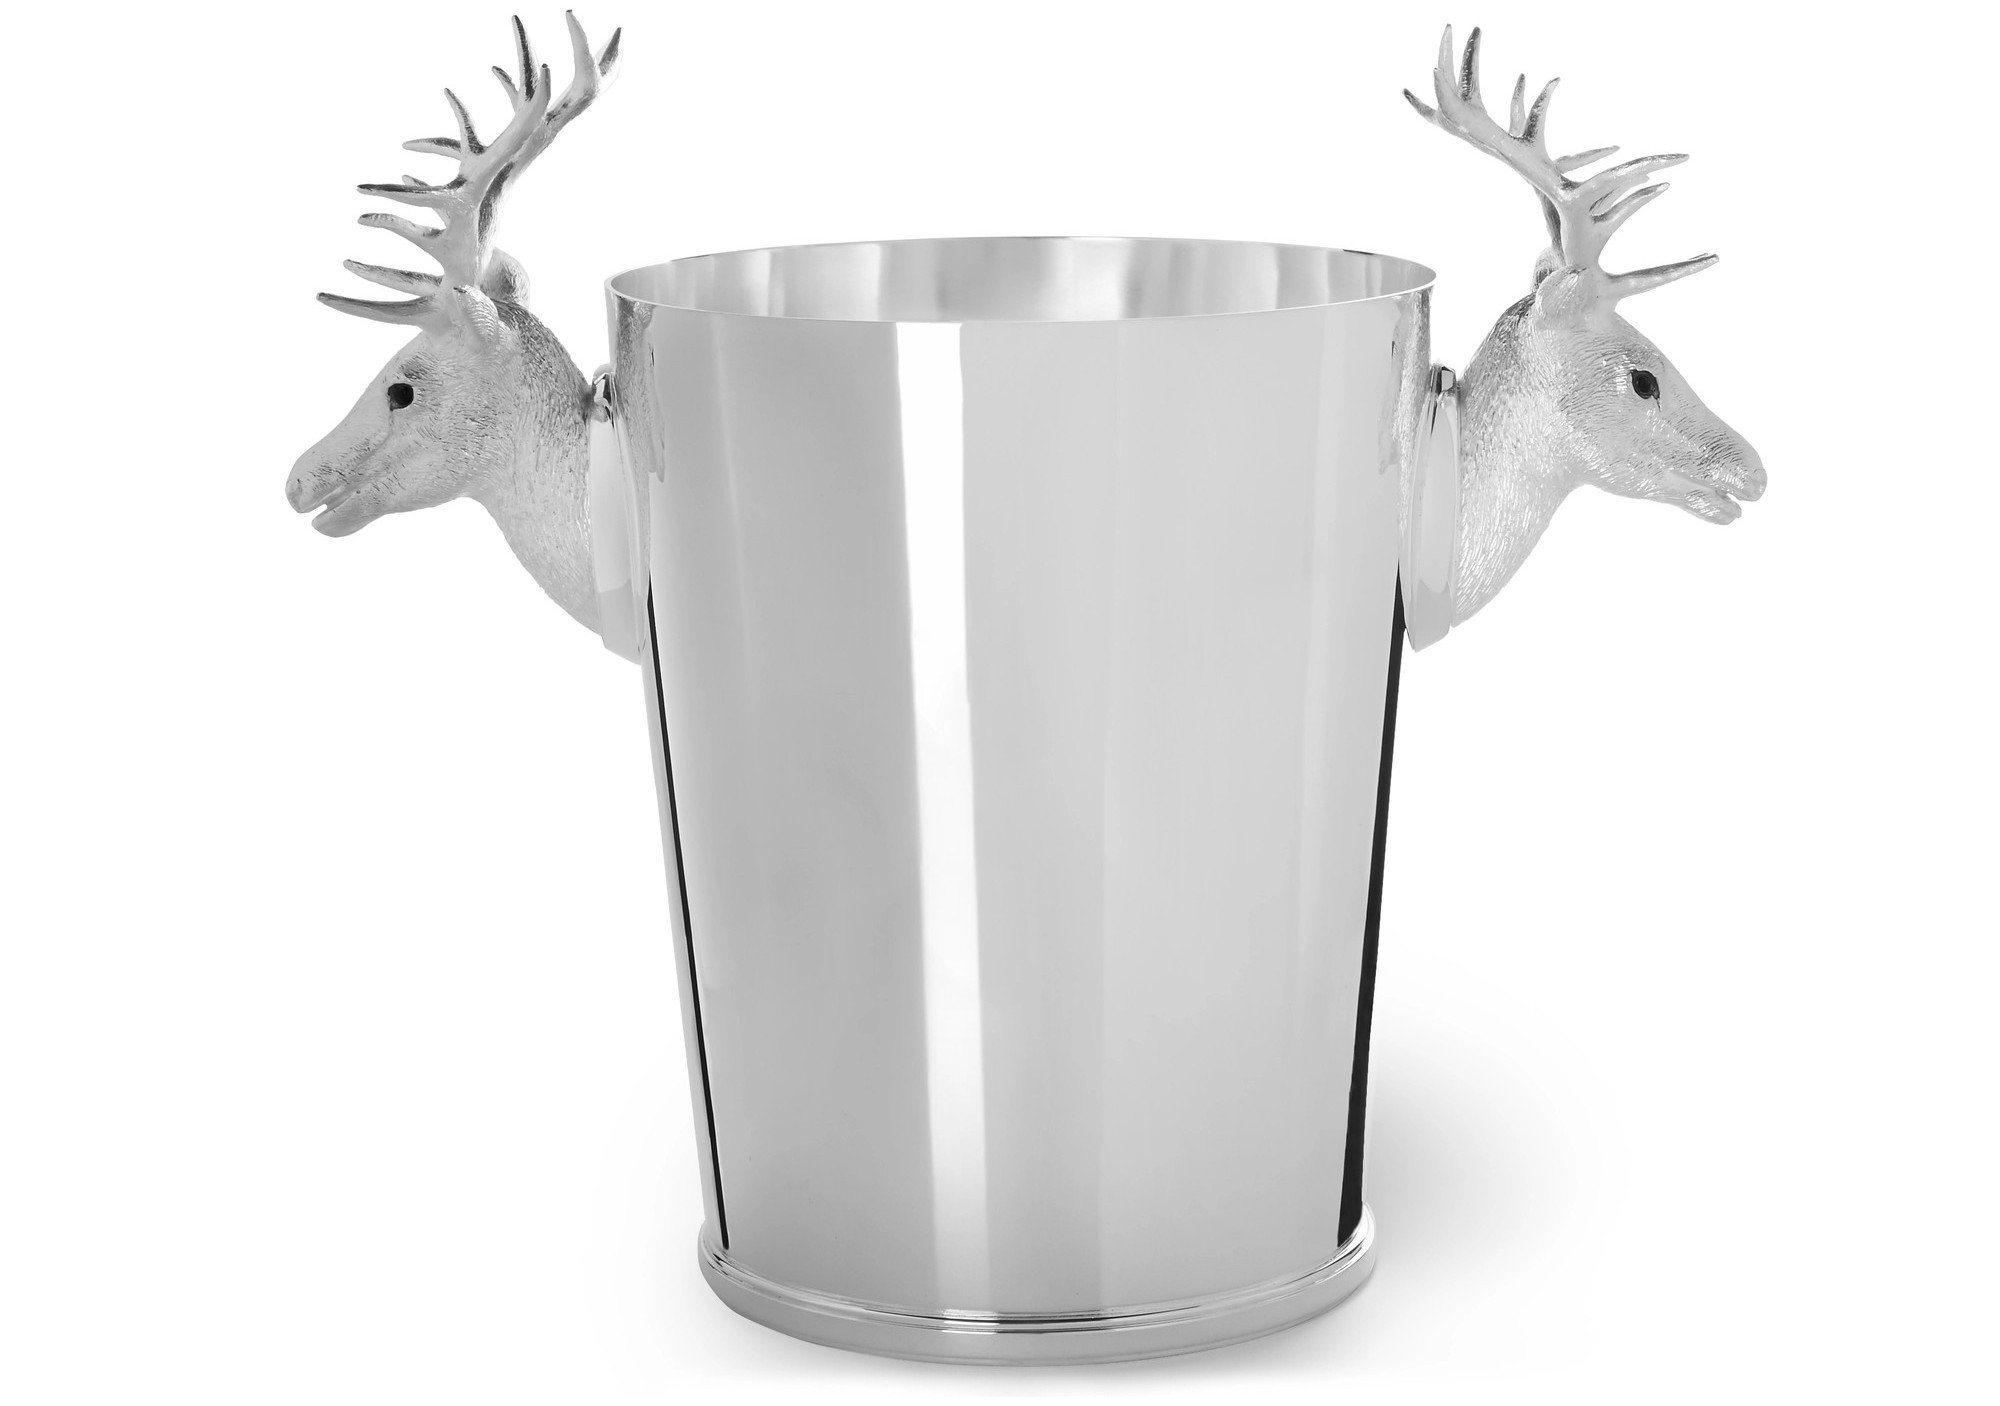 This ice bucket costs a ridiculous $21,000 - Luxurylaunches